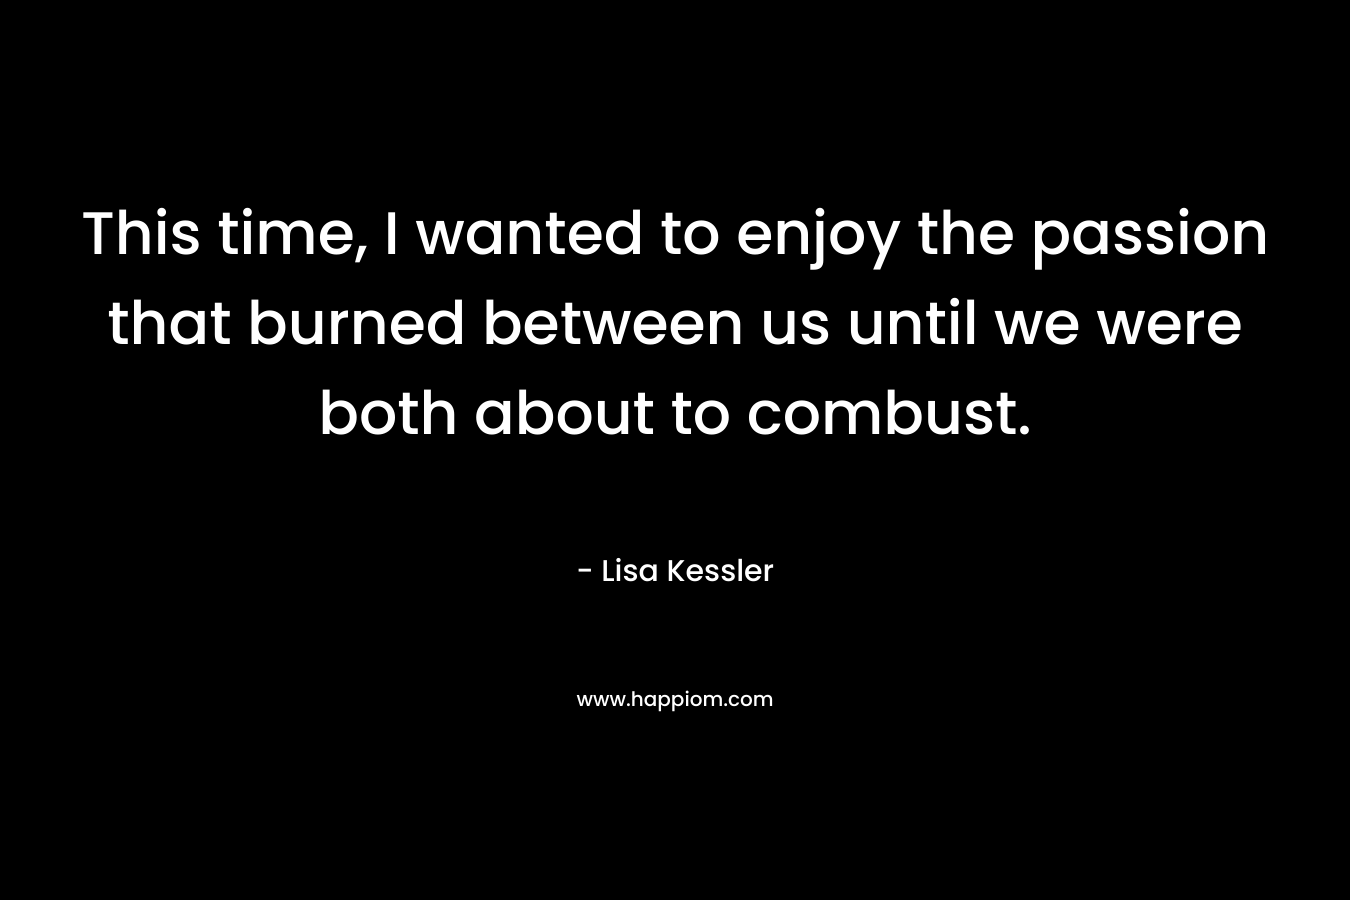 This time, I wanted to enjoy the passion that burned between us until we were both about to combust.